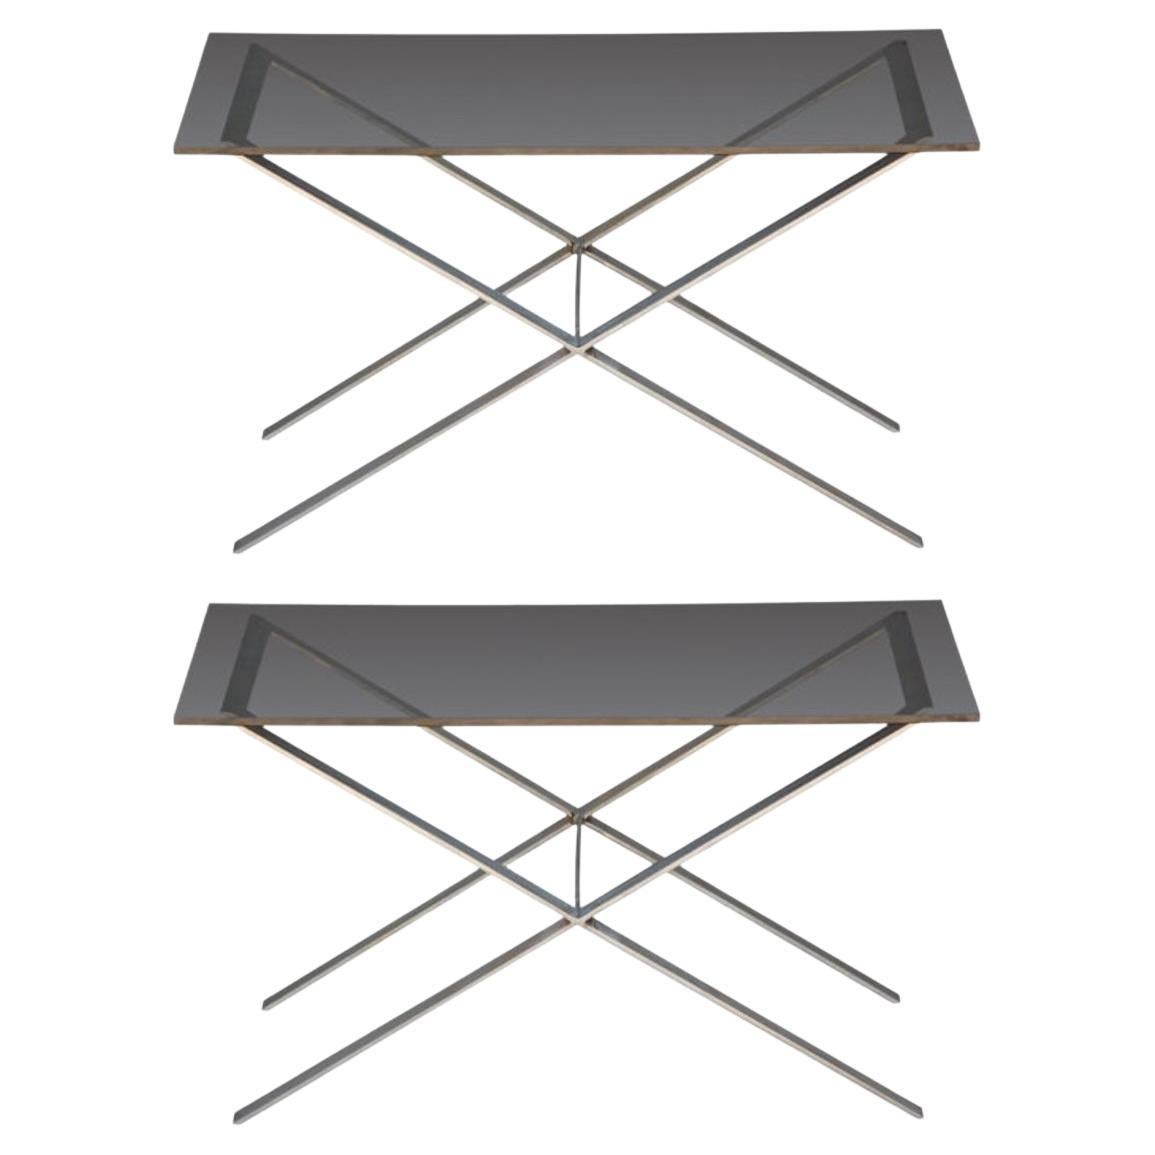 Pair of Minimalistic Stainless Steel and Glass Side Tables For Sale